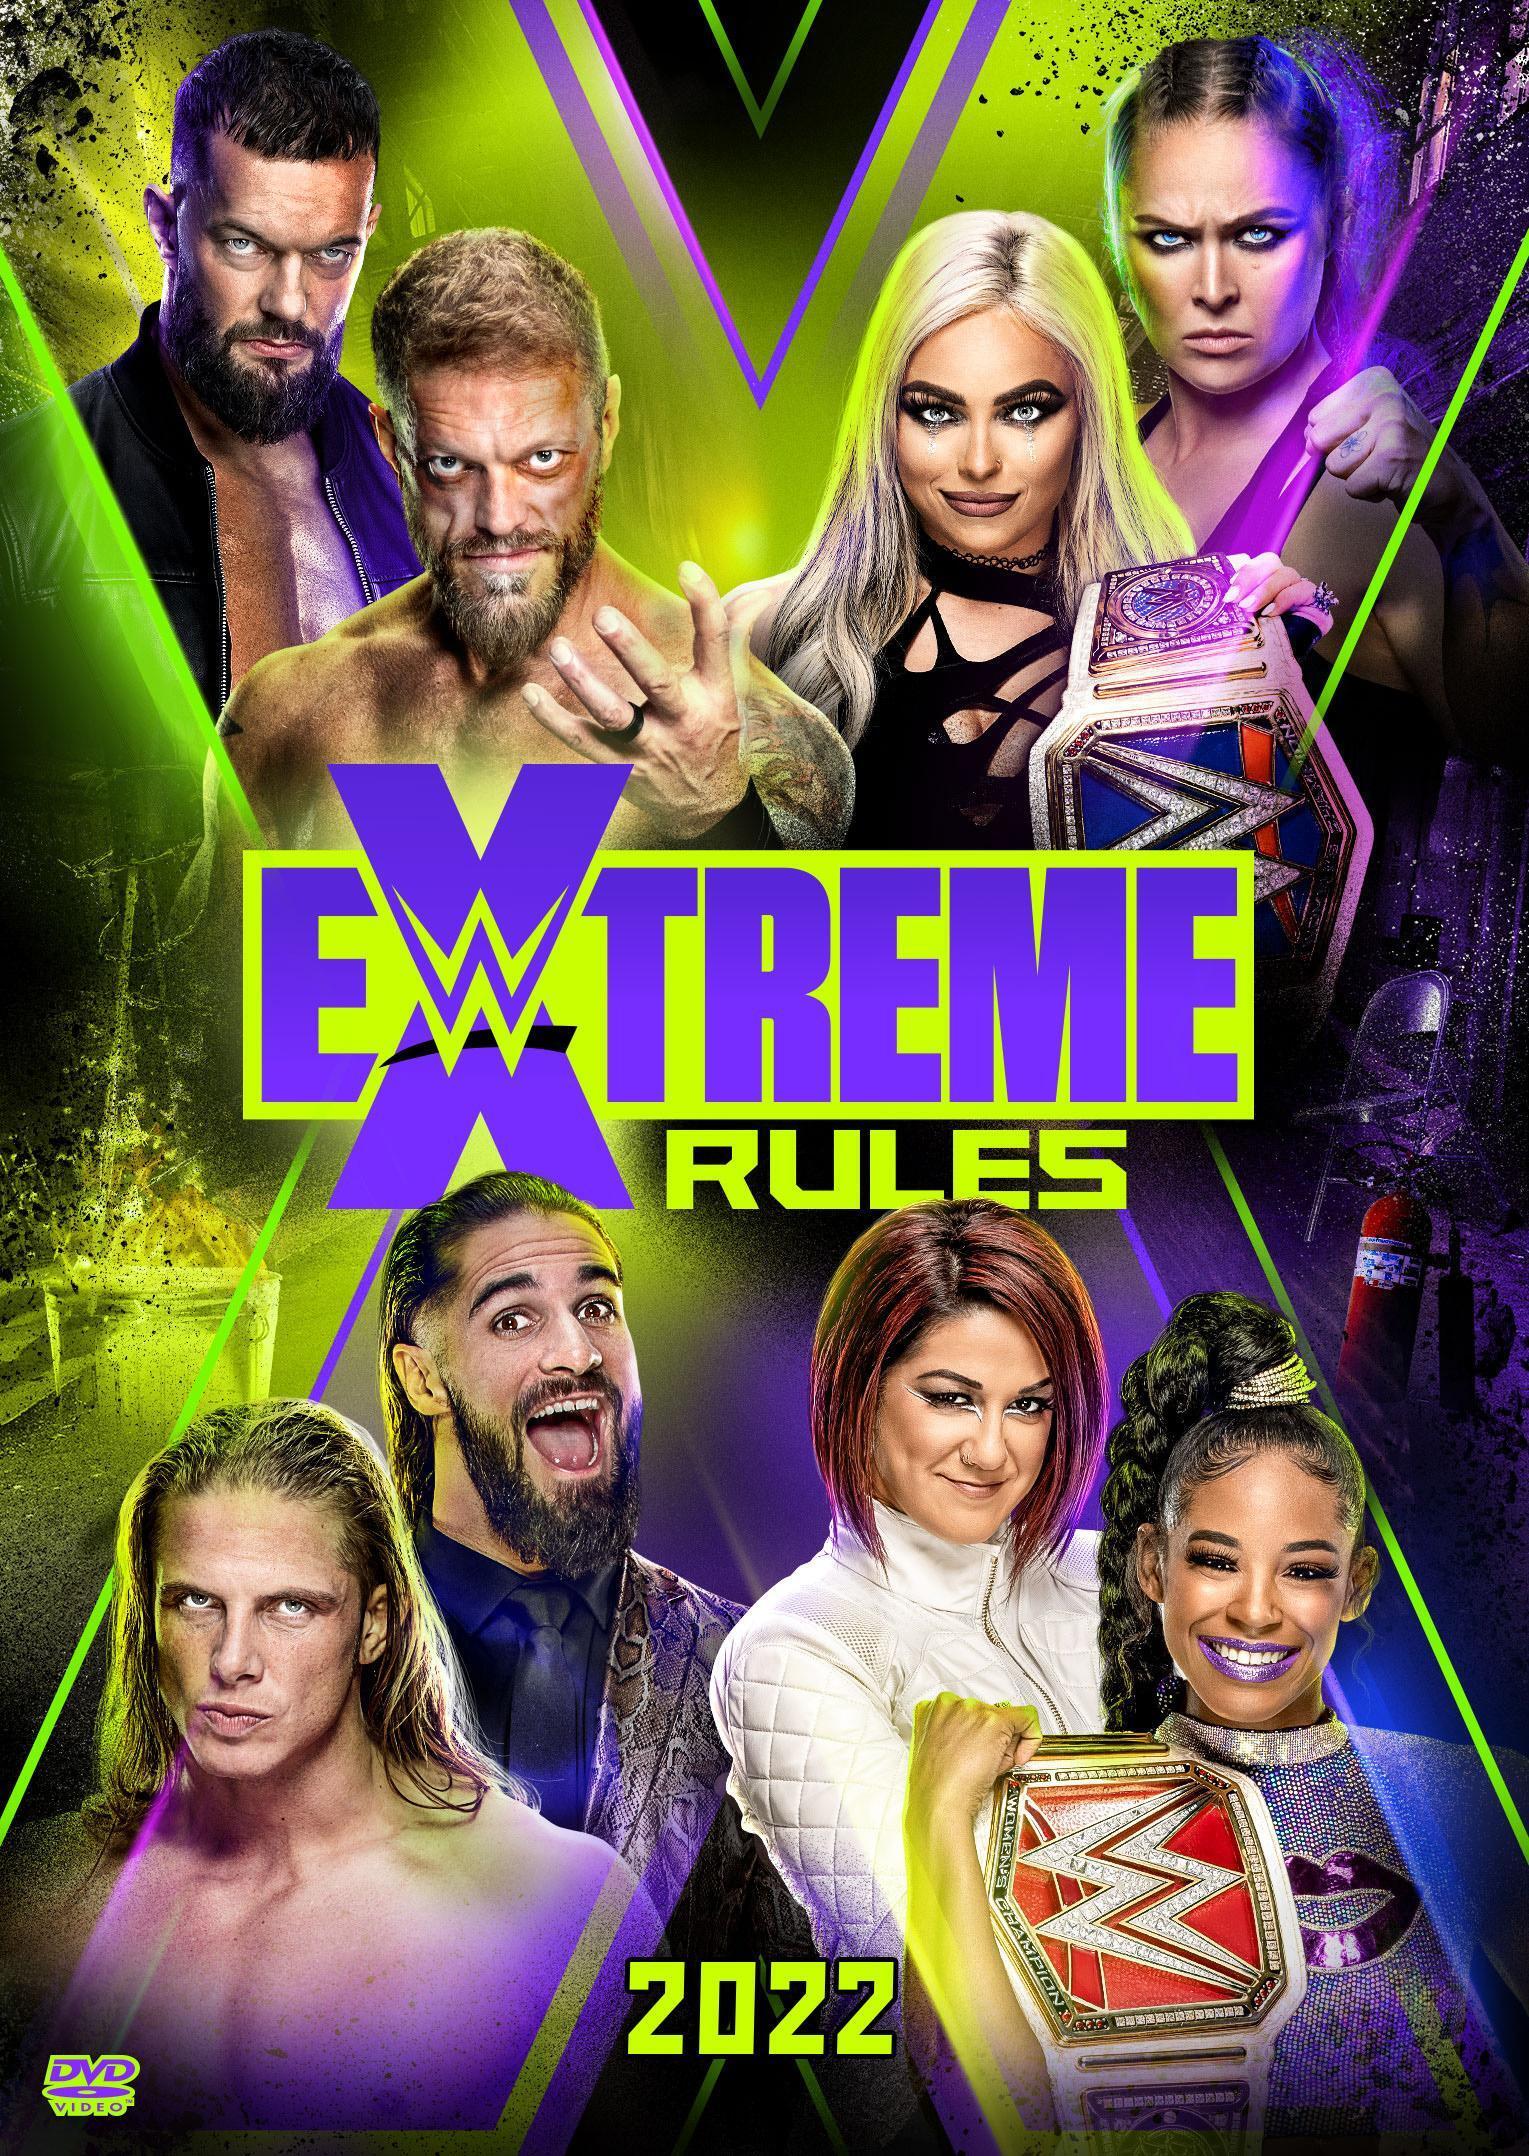 WWE: Extreme Rules 2022 - DVD [ 2022 ]  - Wrestling Sport On DVD